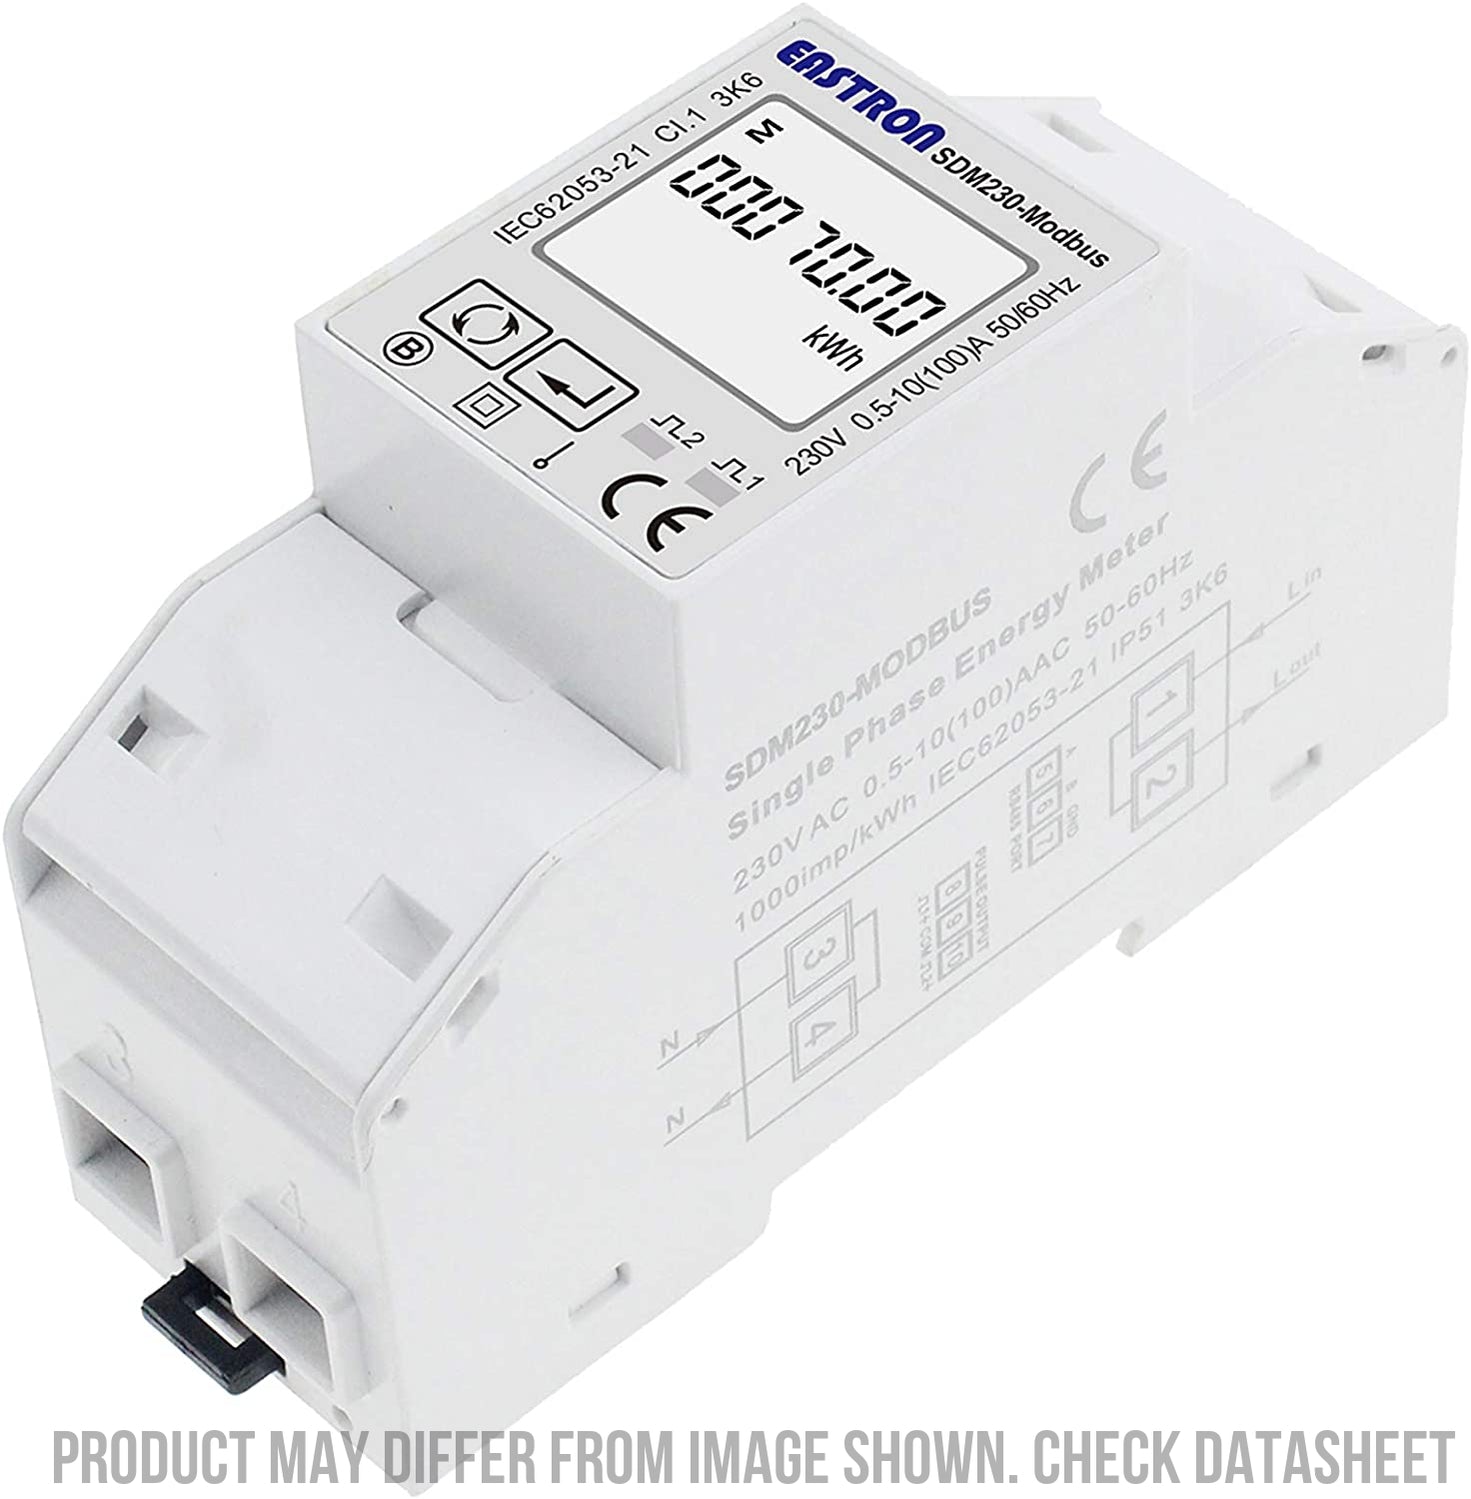 SDM230Modbus-MID-V2 (SLX), DIN Rail Mount kWh Meter, Single Phase, 240VAC aux, Class 1, 100Amp Direct Connect, w/ 2 x pulse outputs and RS485 Modbus RTU Comms, MID Approved